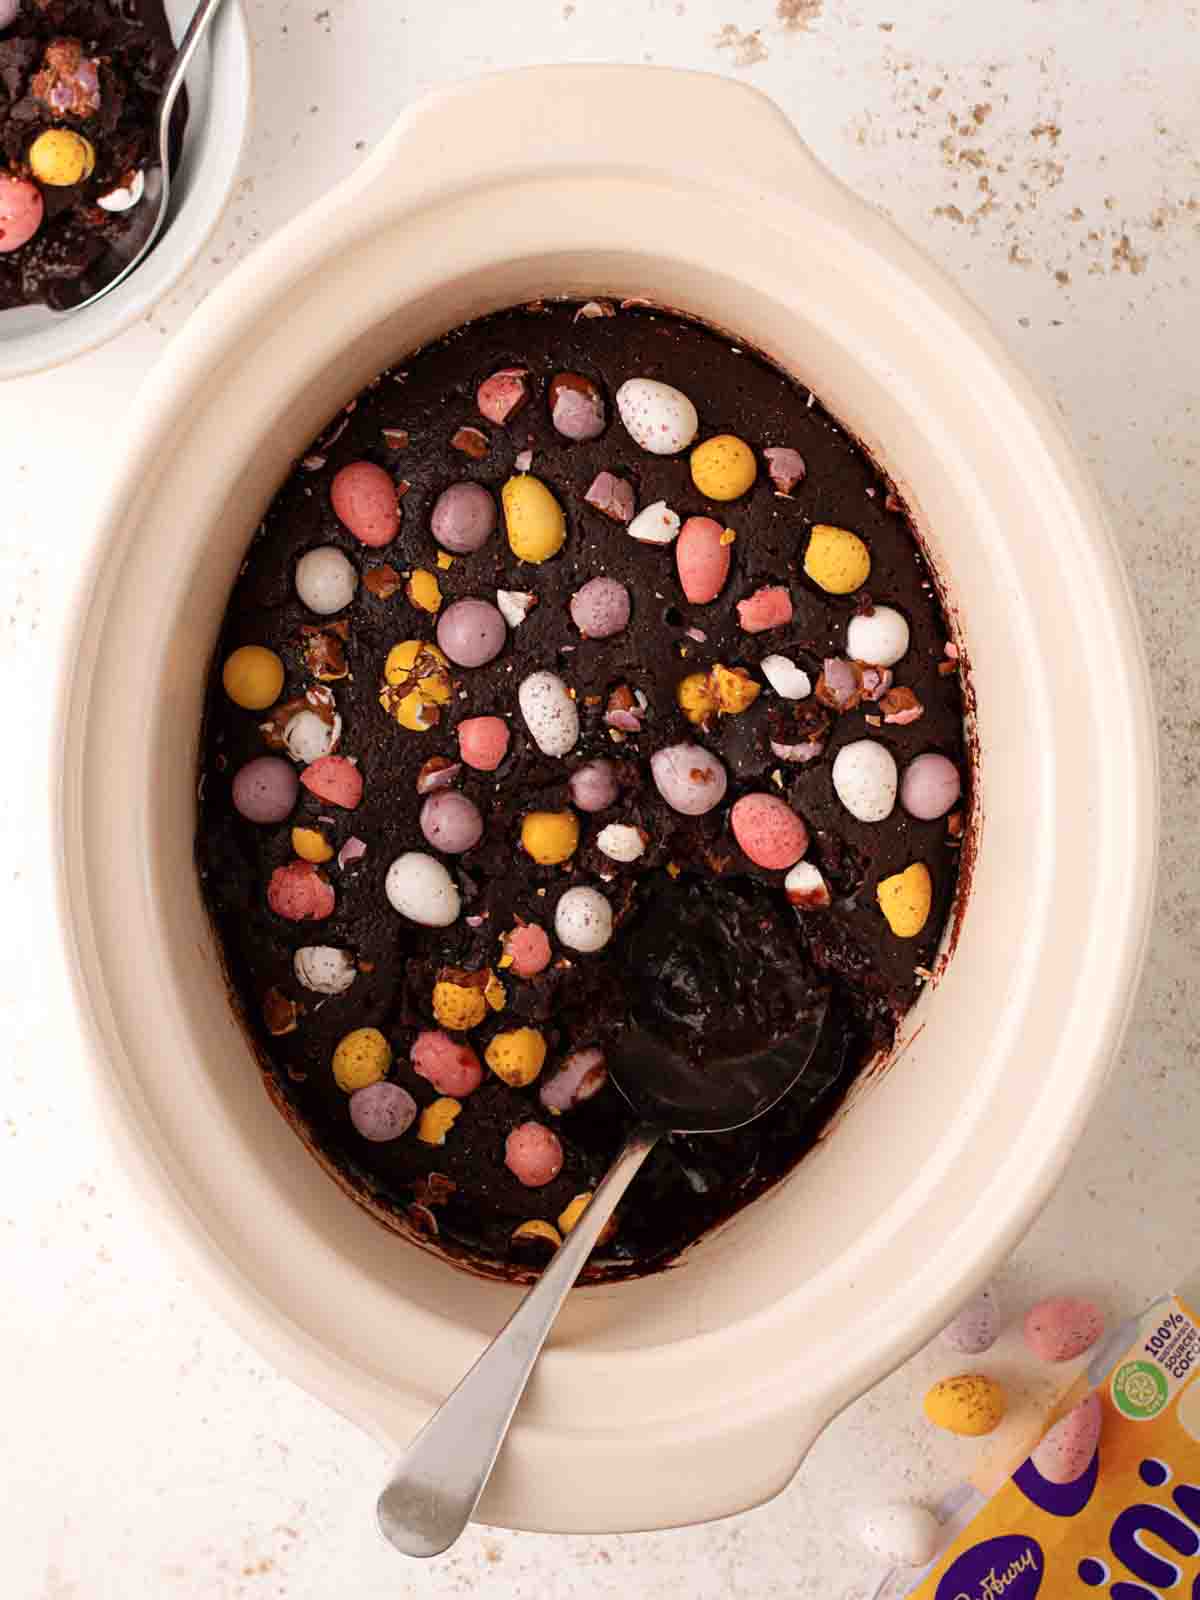 Looking down on a table with a slow cooker pan filled with mini egg easter chocolate pudding with a bowl at the side and a bag of mini eggs.